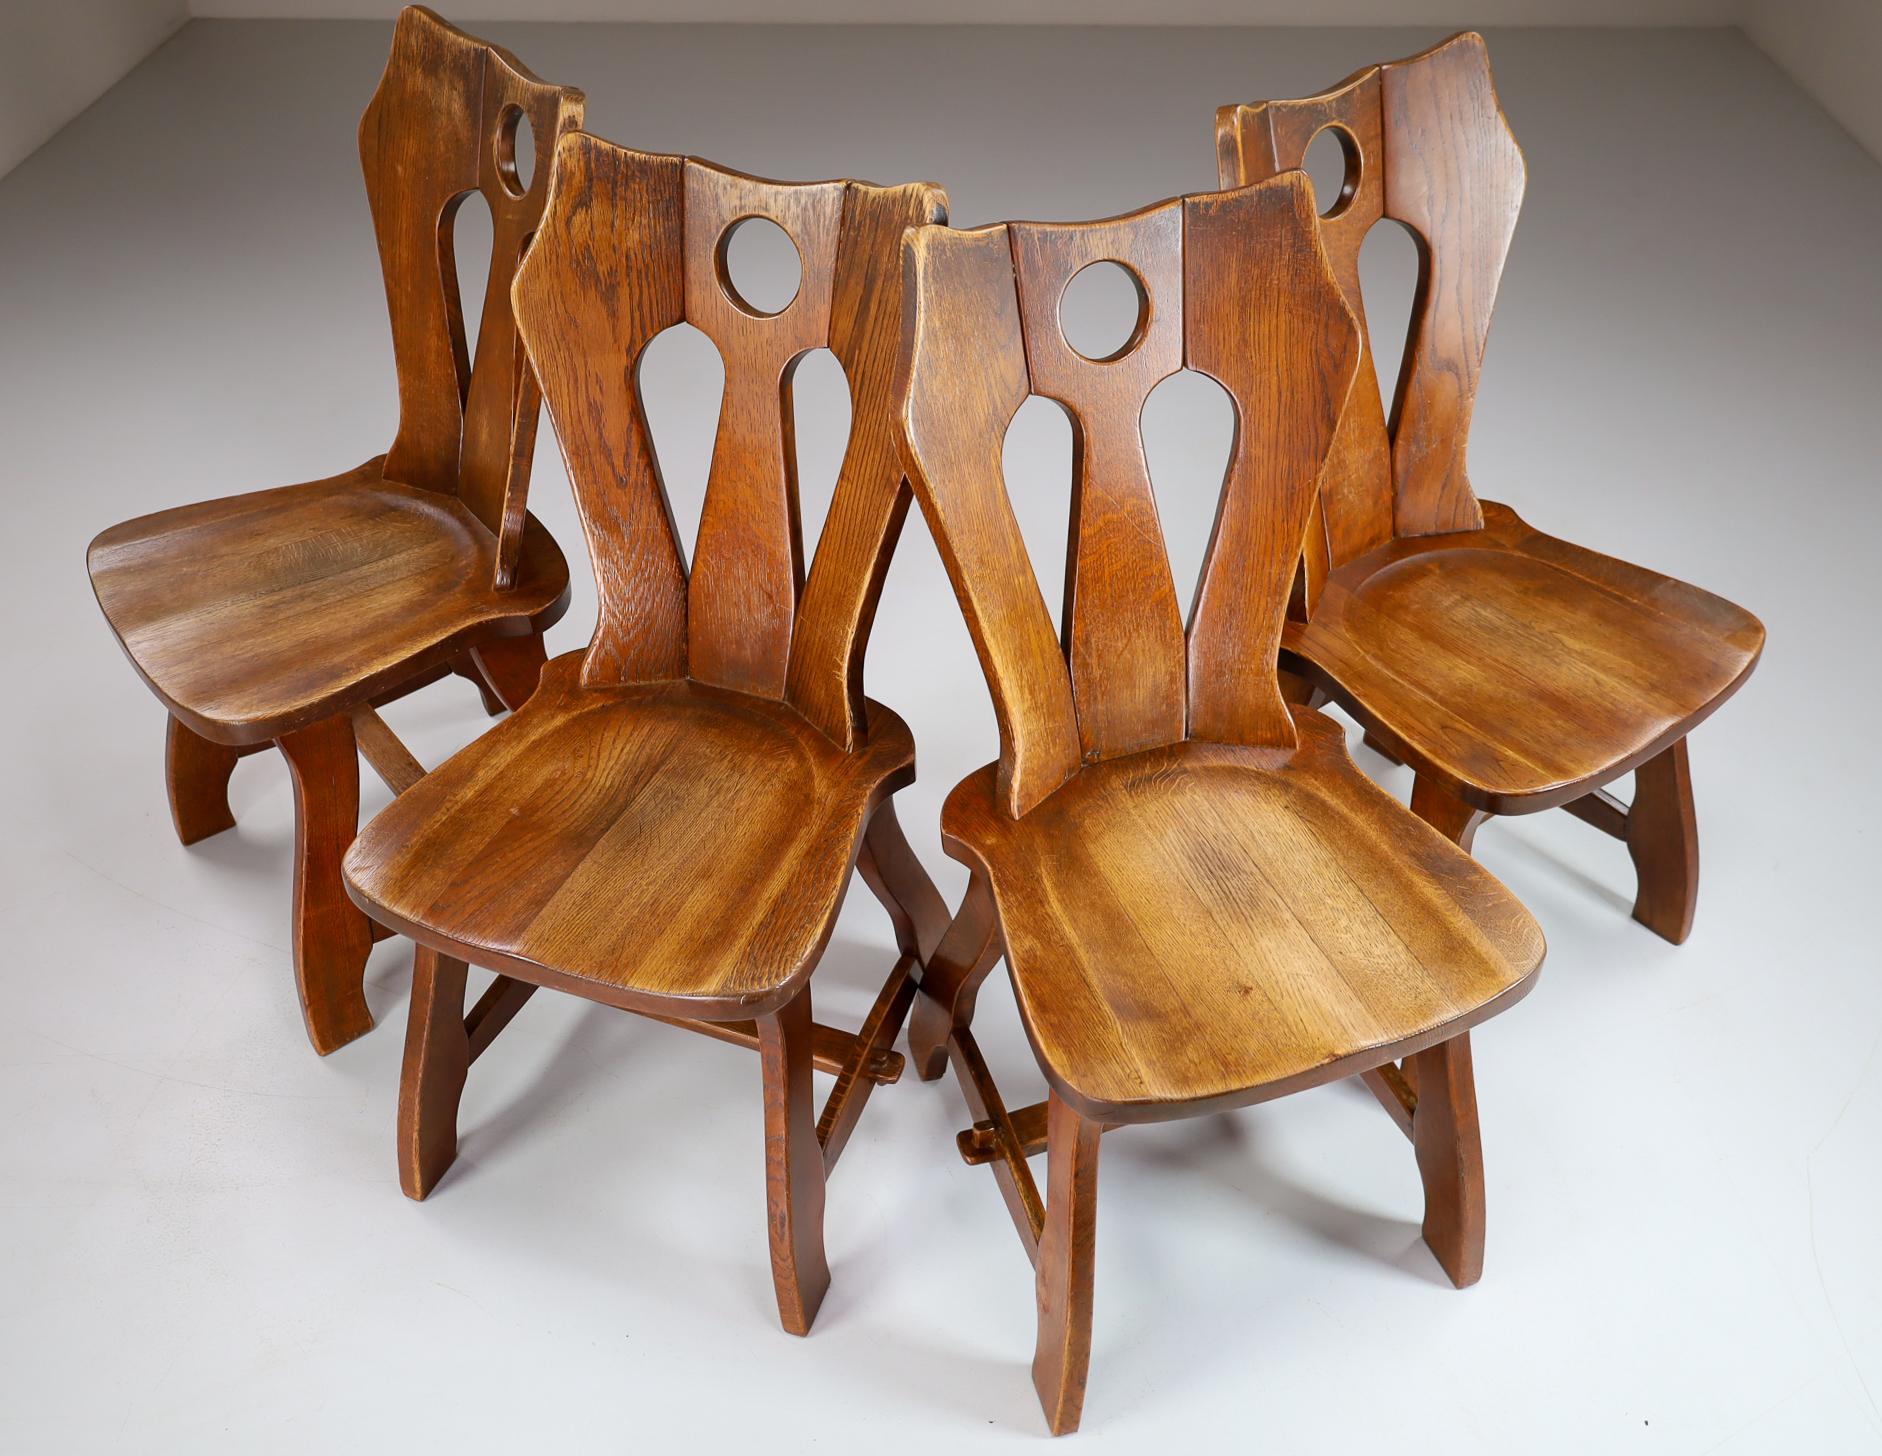 Set of Four Brutalist Chairs in Patinated Oak, Belgium, 1960s For Sale 1